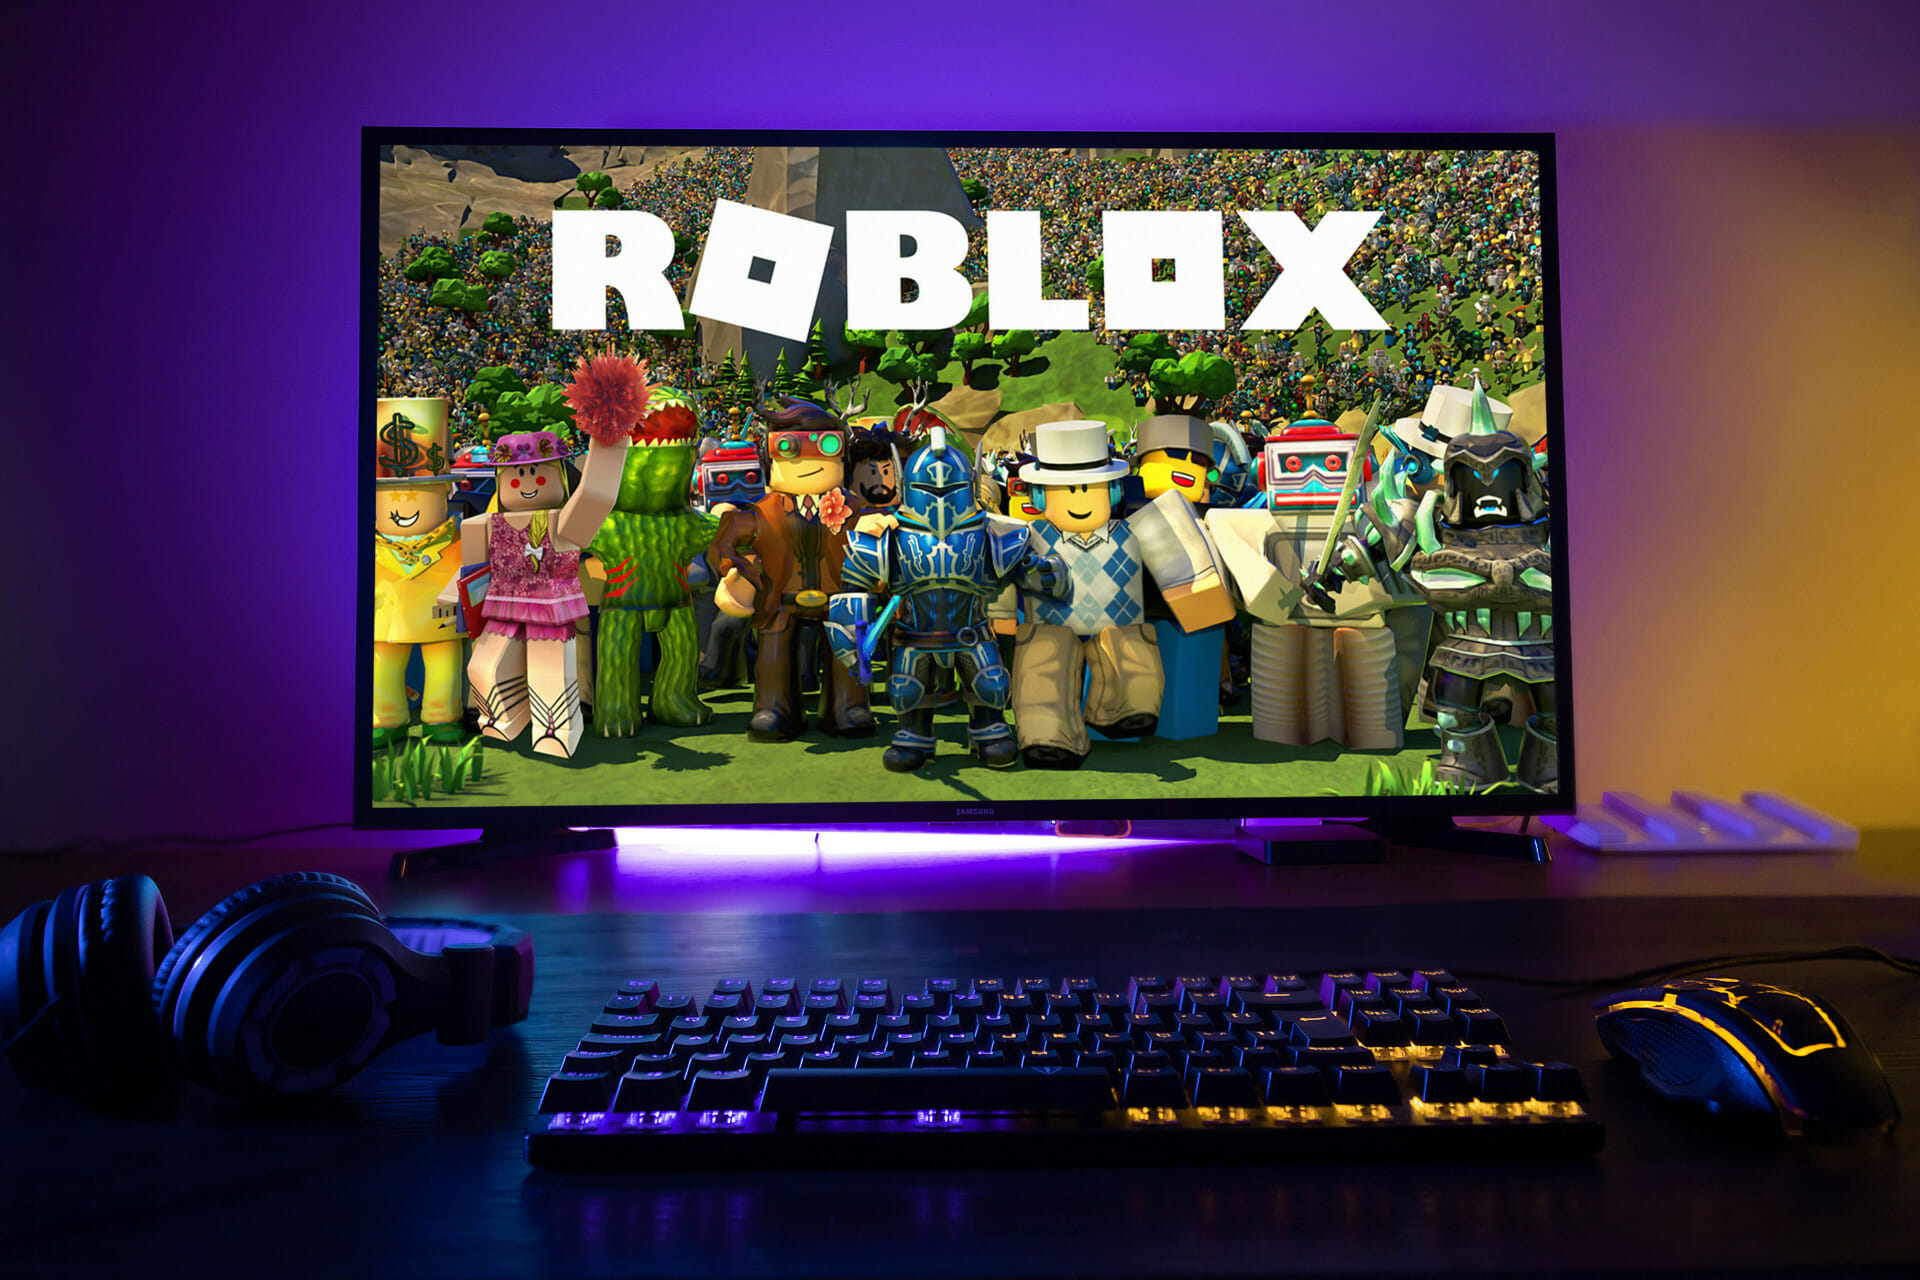 How to Play Roblox using Firefox (proof ) 